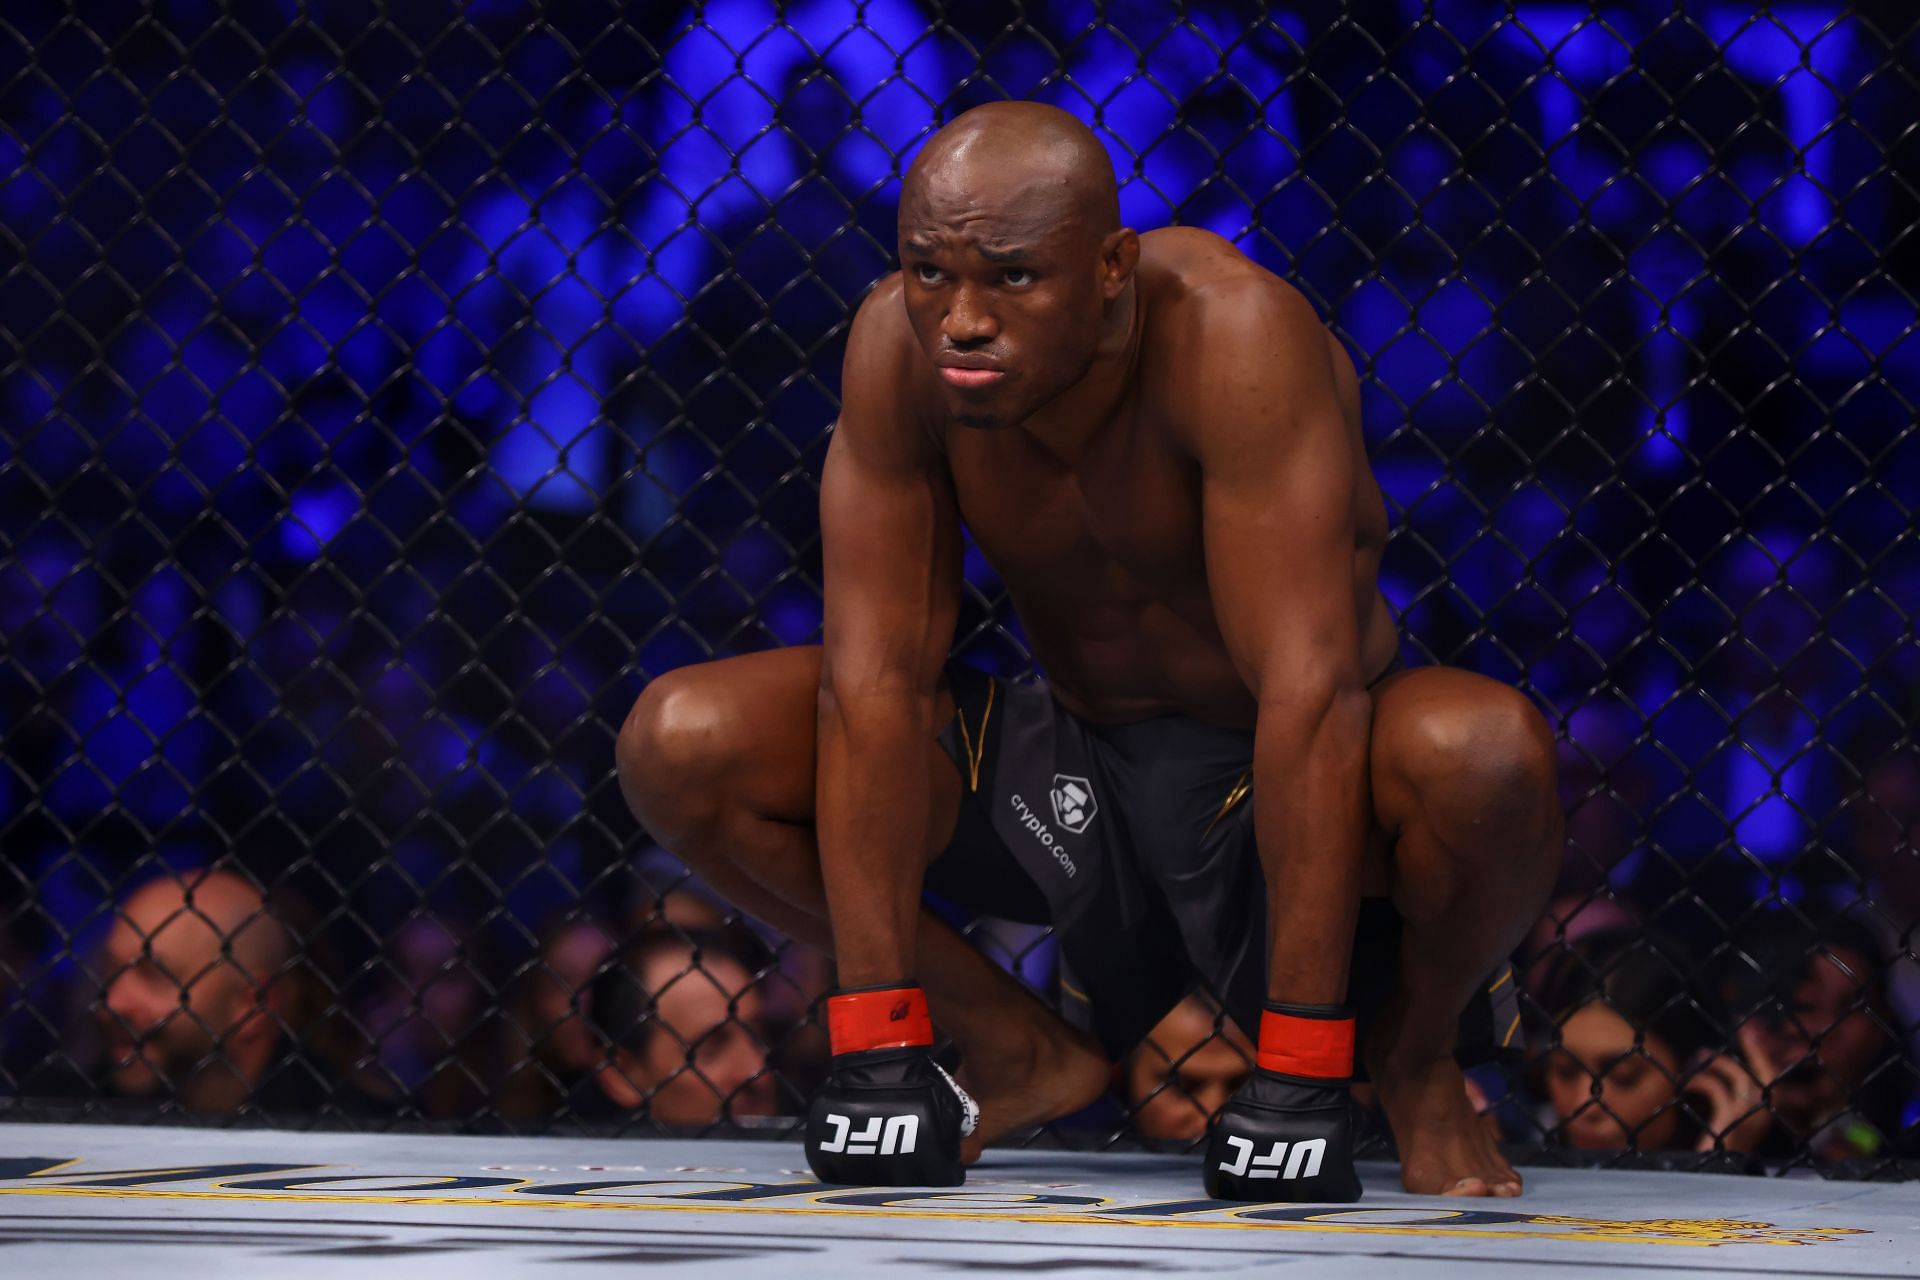 Welterweight champion Kamaru Usman made his UFC debut on The Ultimate Fighter